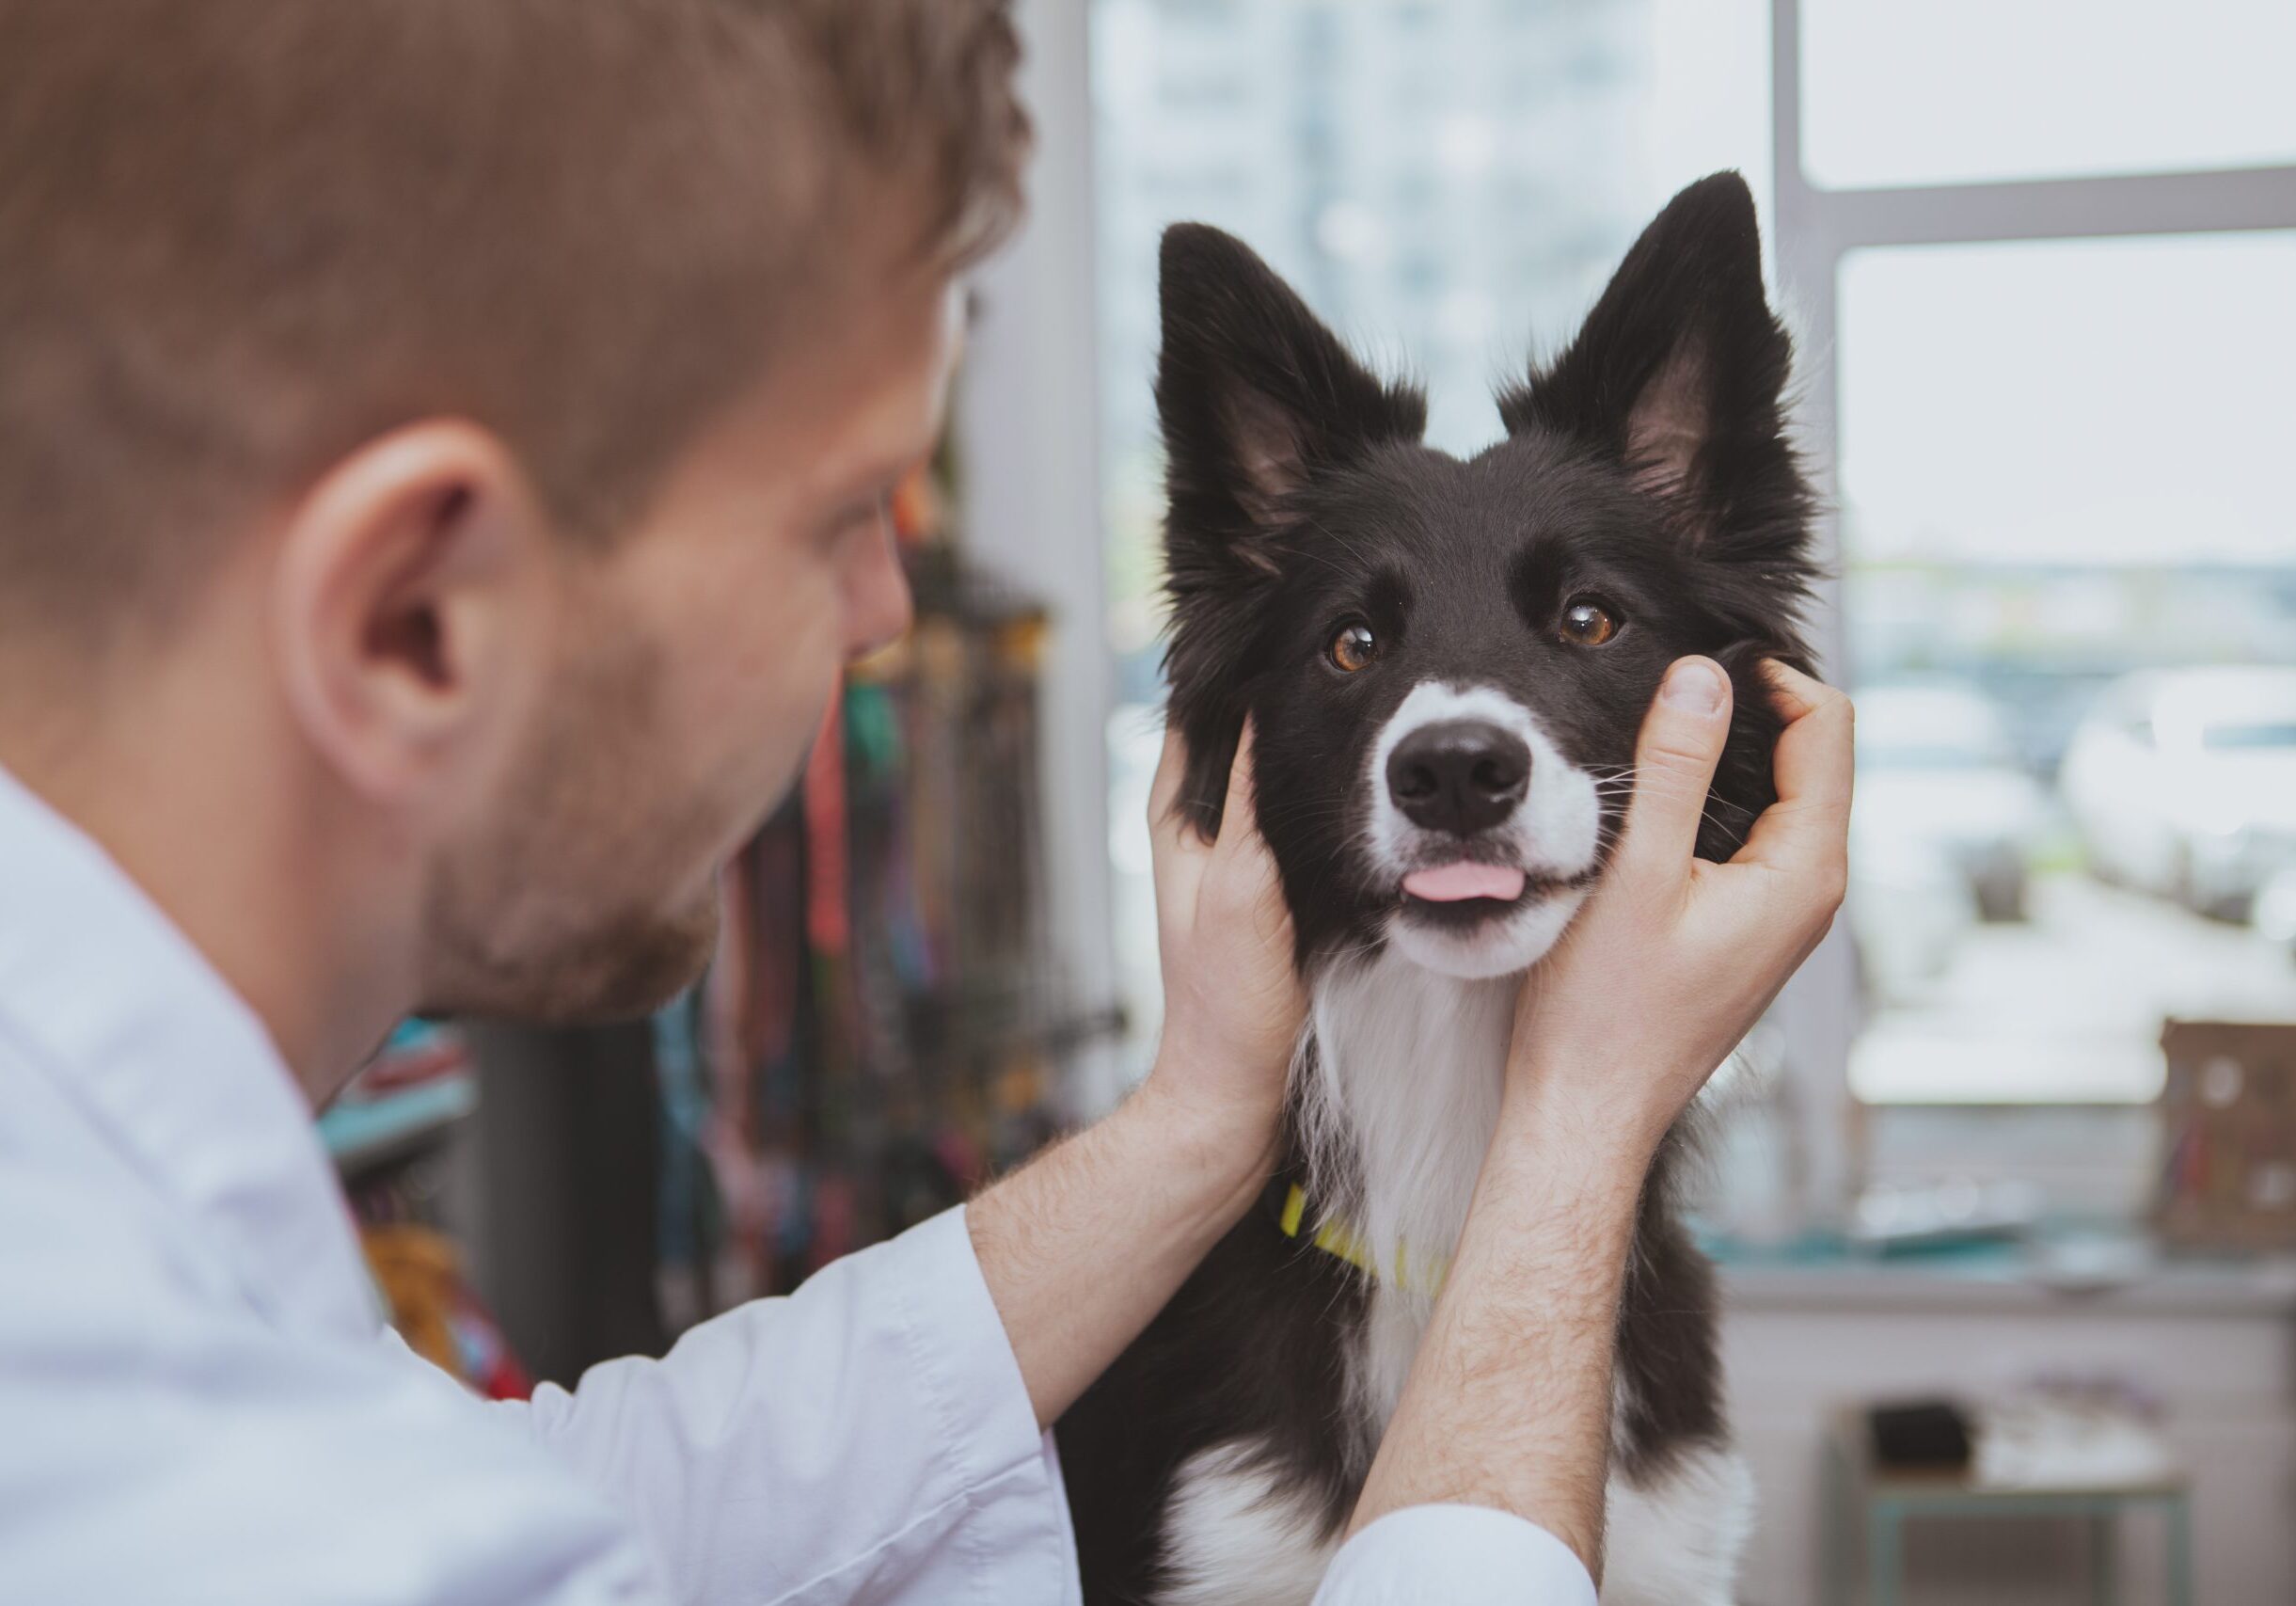 Close up of a cute happy healthy dog sticking out its tongue during medical examination by vet doctor. Rear view shot of a professional veterinarian examining adorable funny dog